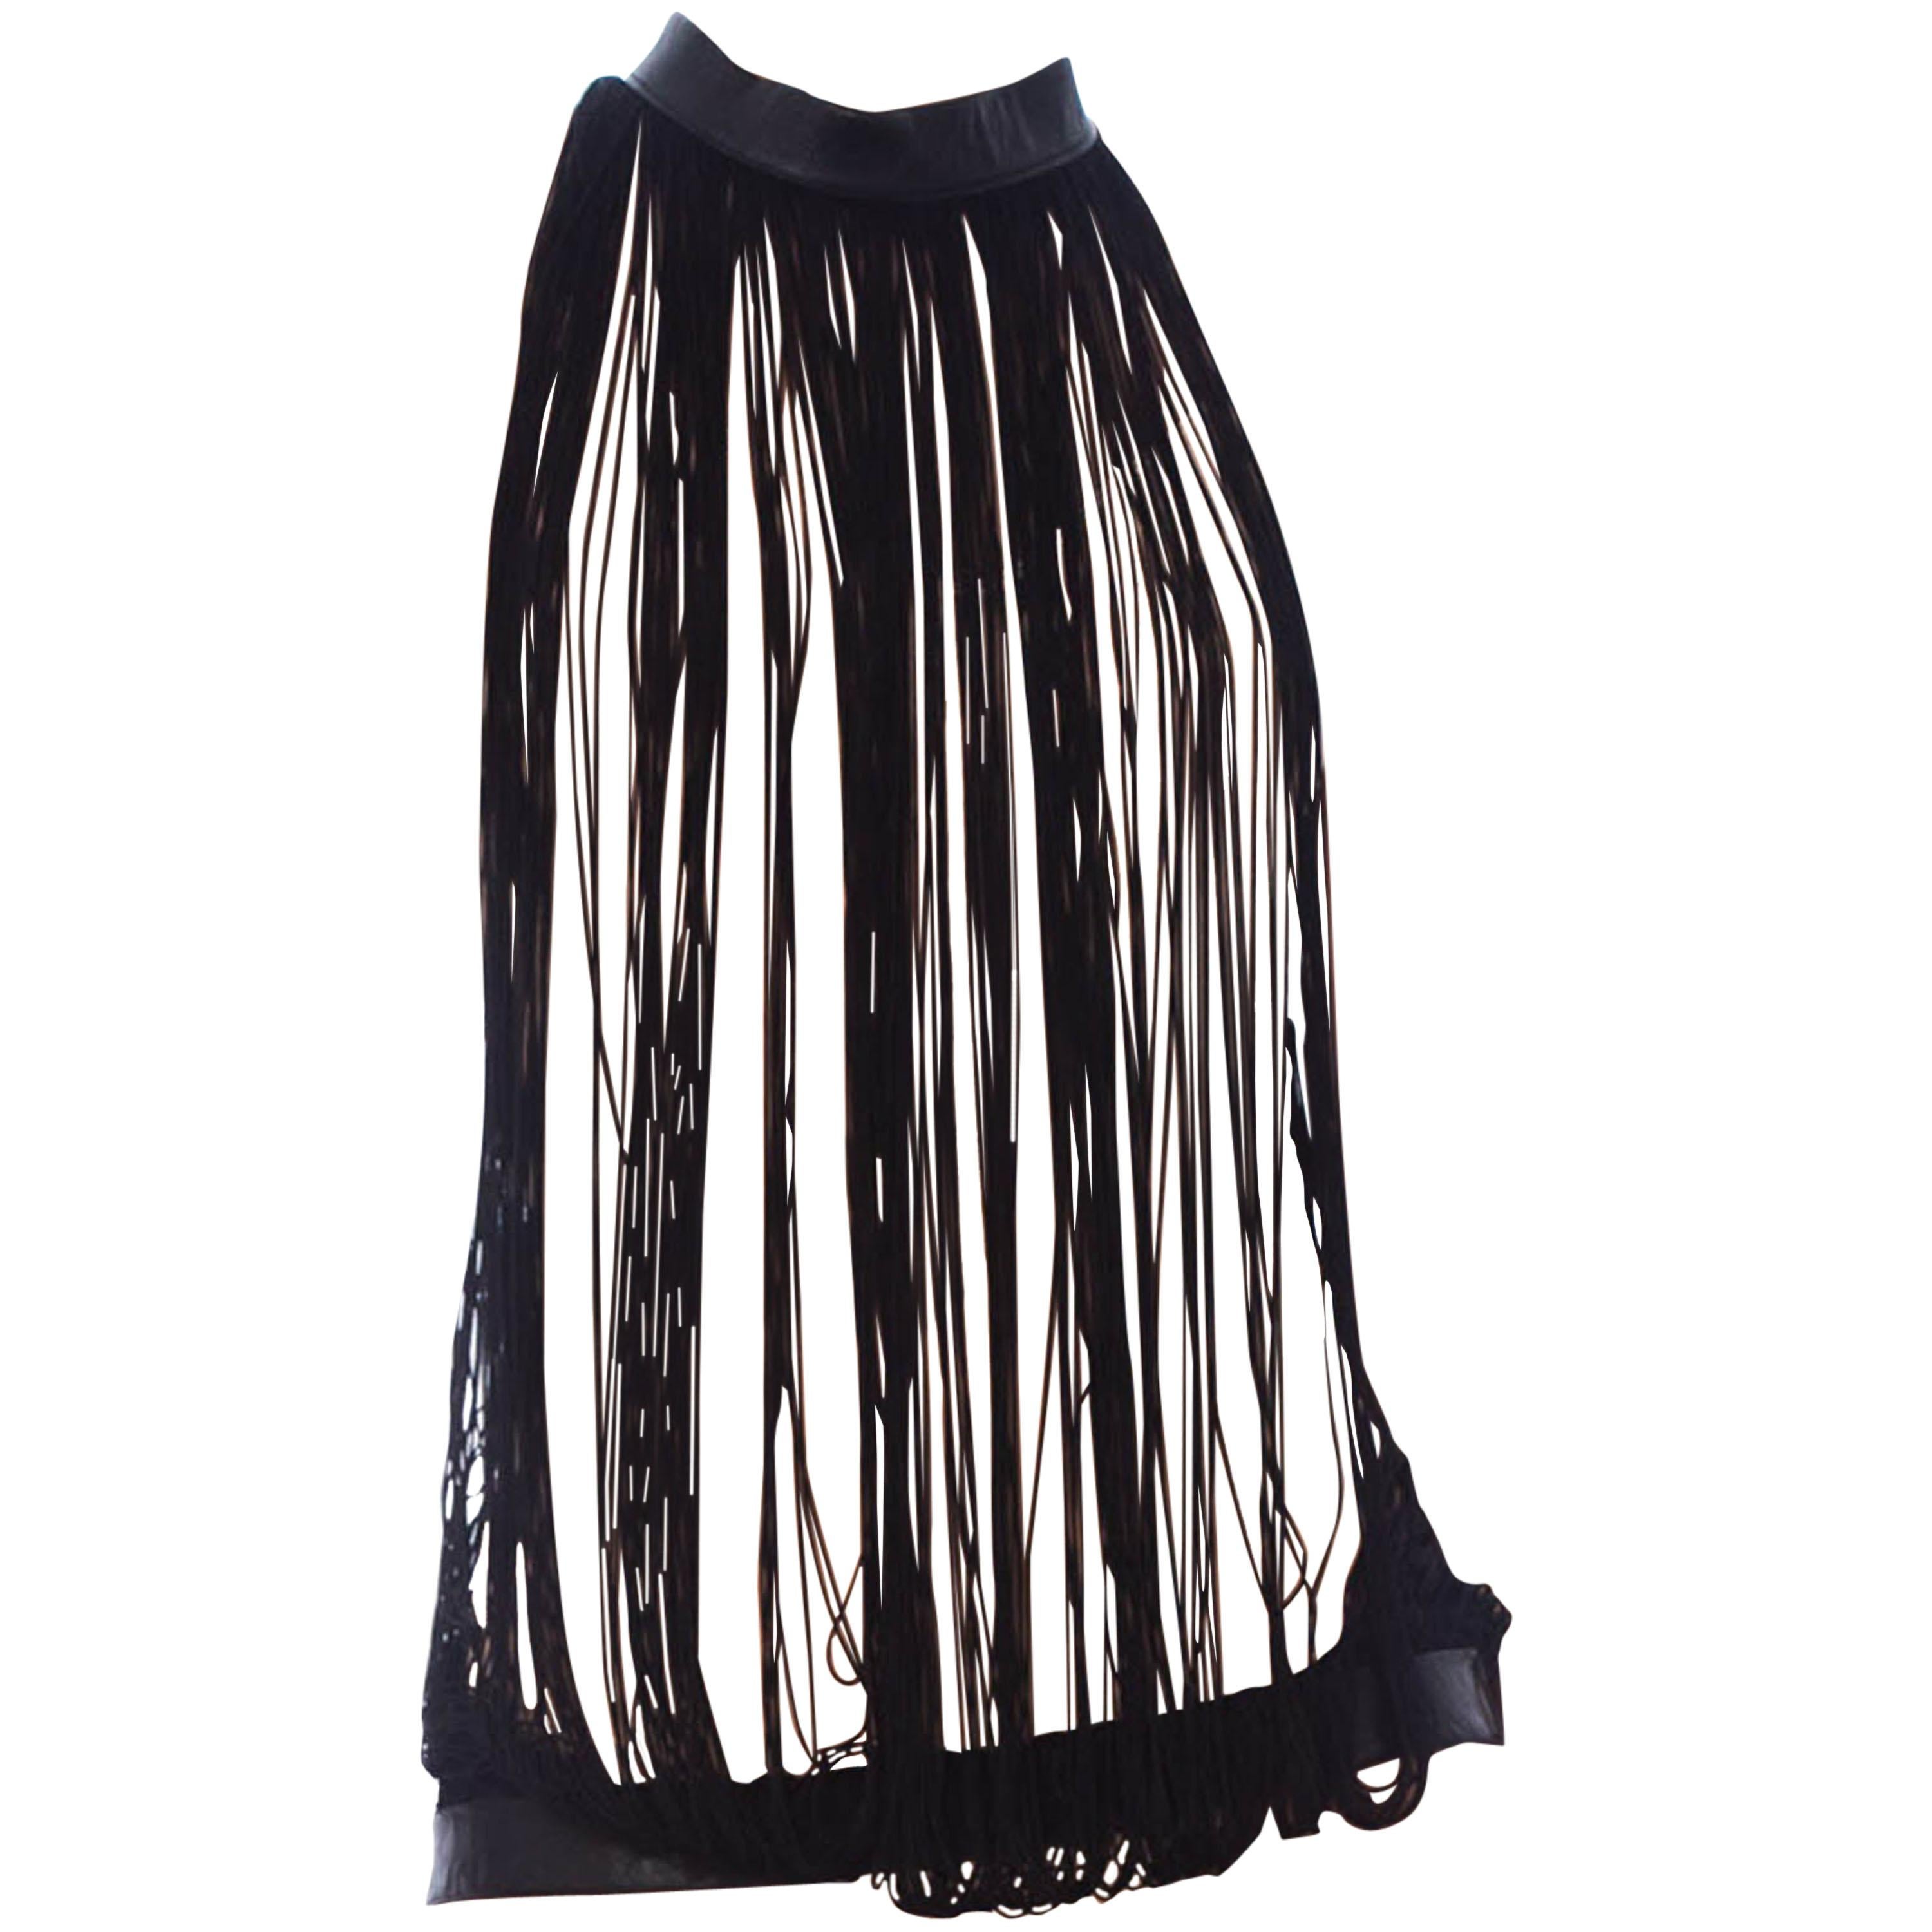 MORPHEW COLLECTION Black Fringe & Leather Sexy Convertible Top For Sale